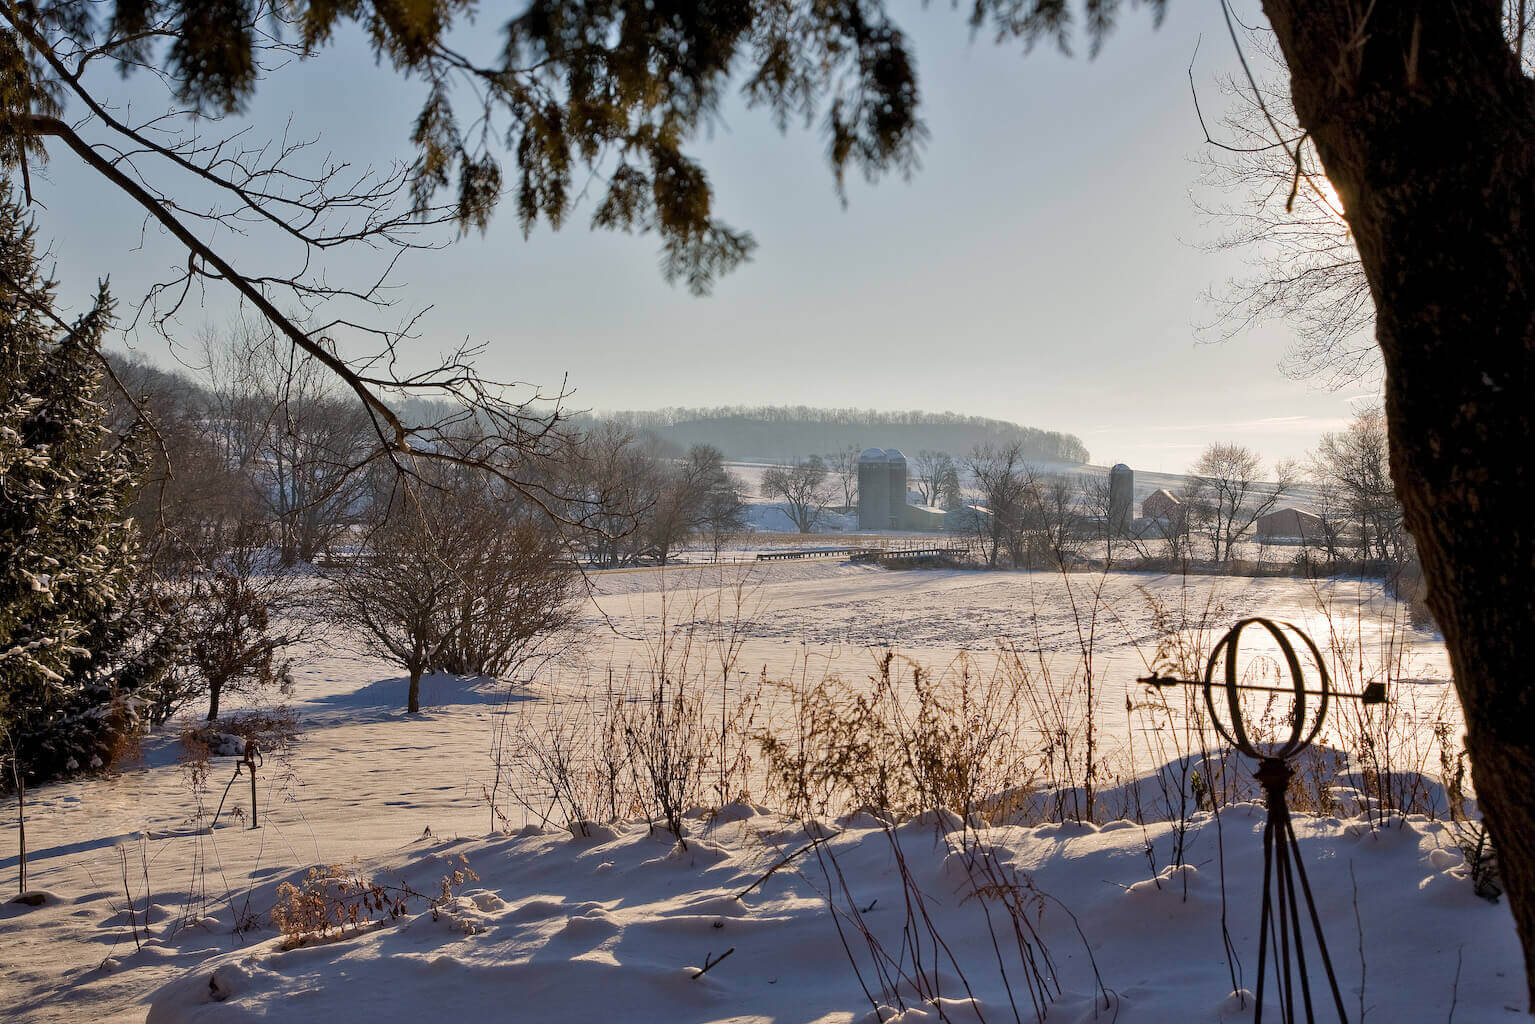 You, Snowshoes, and the Countryside